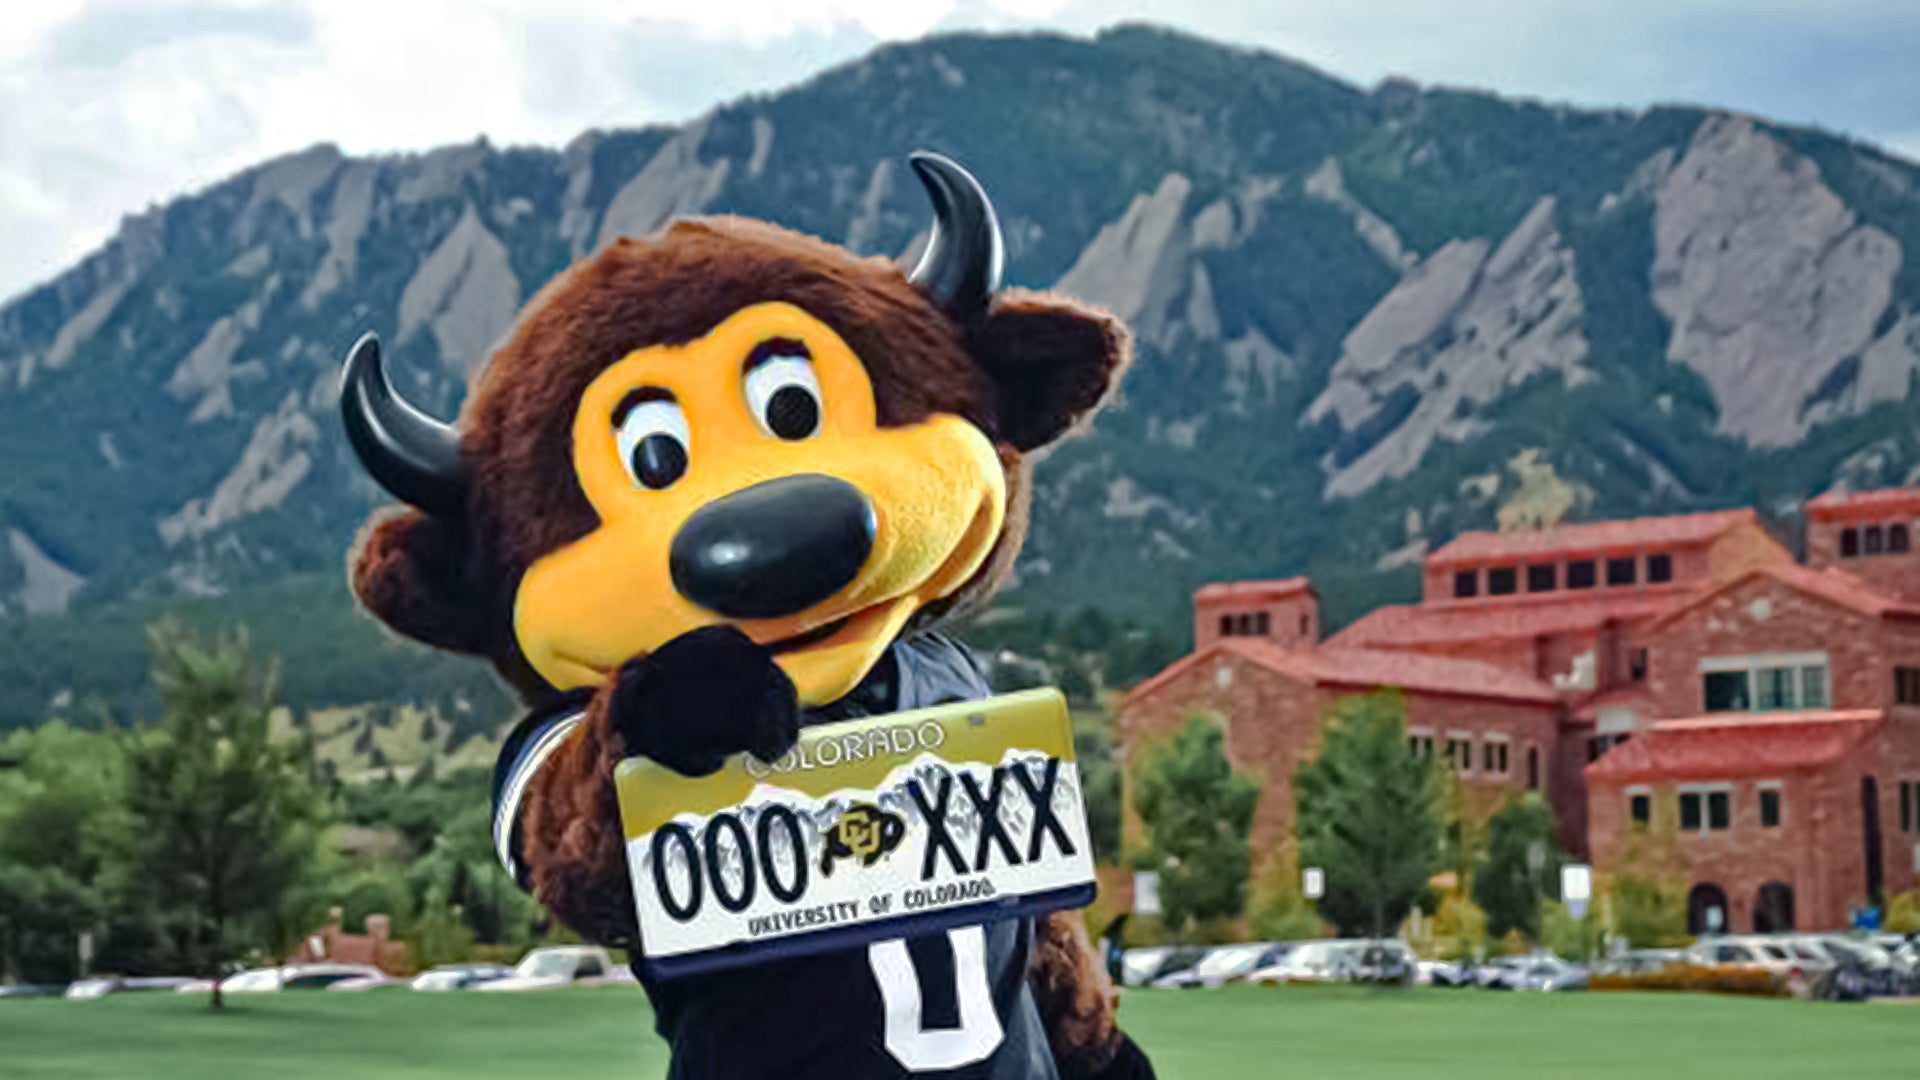 CU Boulder mascot Chip holding up a University of Colorado license plate 